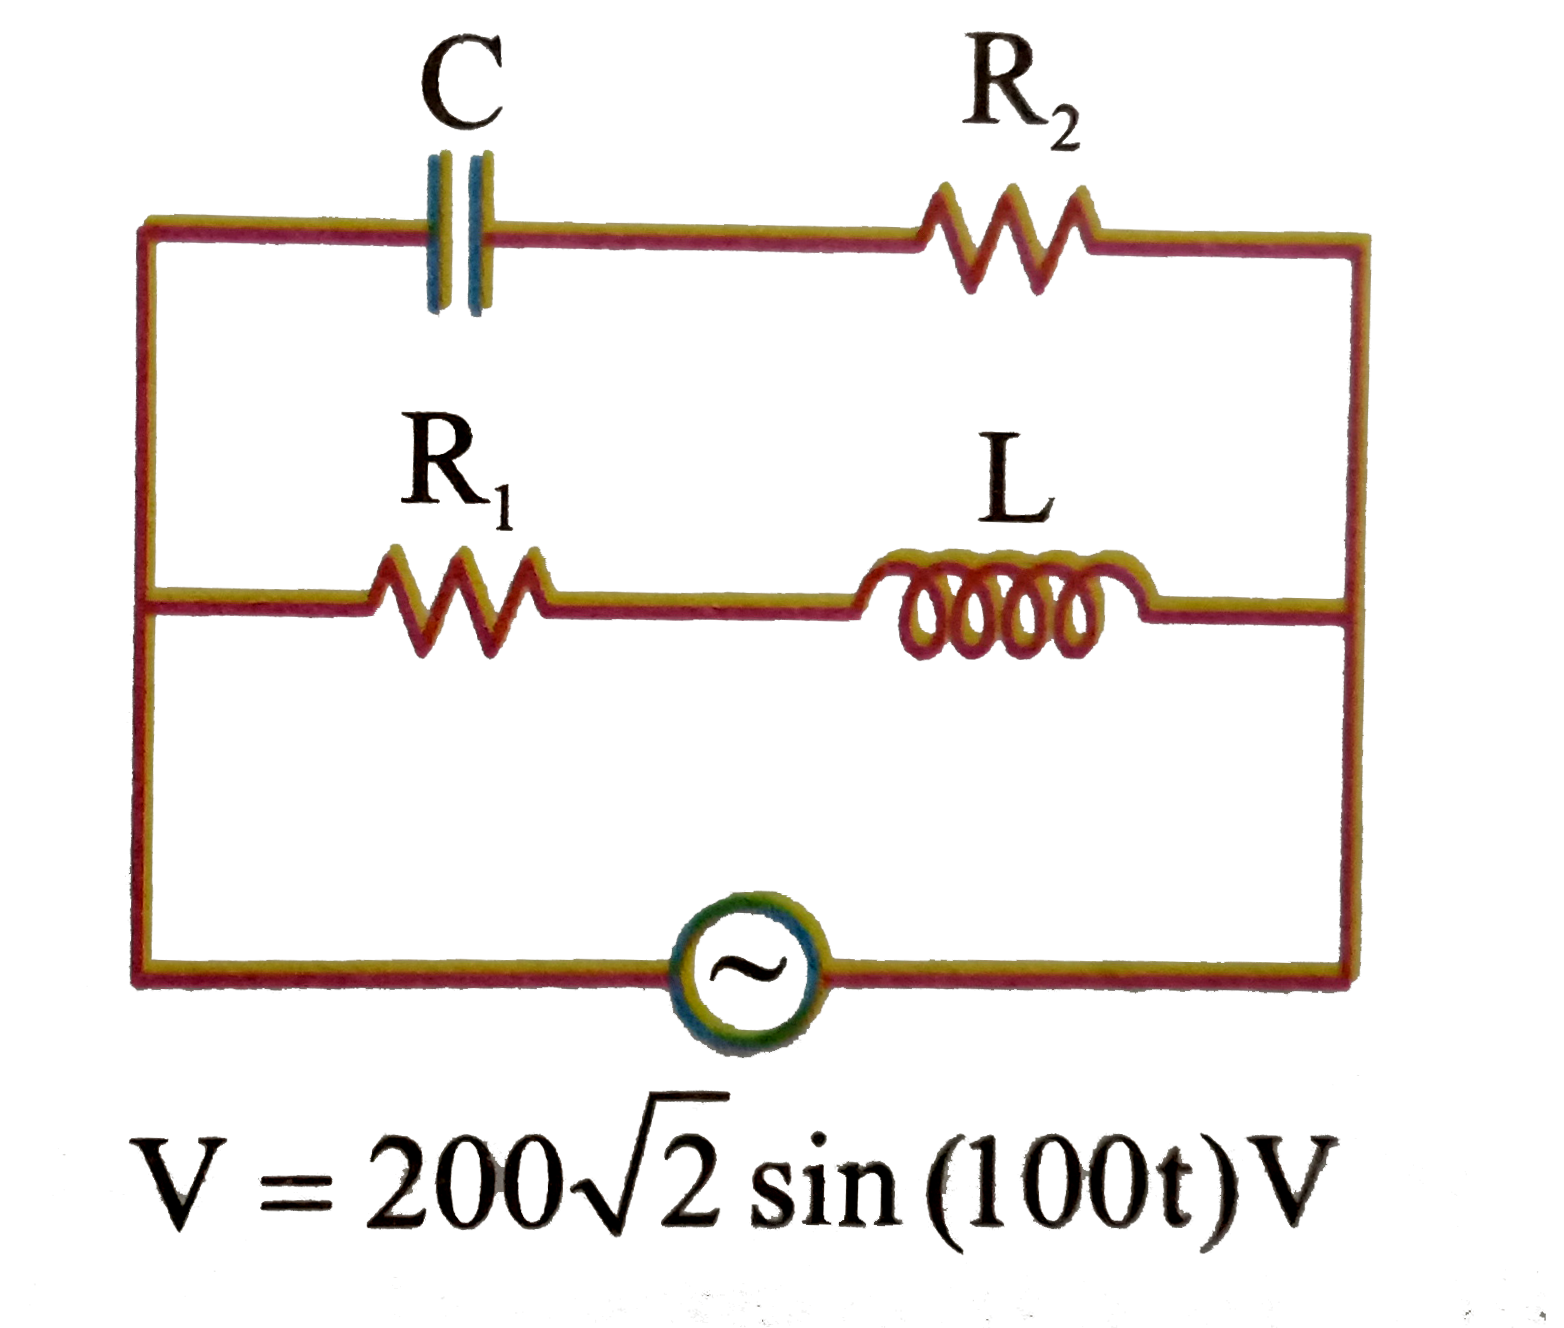 In the circuit shown in figure :   R = 10 Omega , L = (sqrt(3))/(10) H, R(2) = 20 Omega and C = (sqrt(3))/(2) mF. Current in L - R(1) circuit is I(1) in C - R(1) circuit is I(2) and the main current is I      At some instant I(1) in the circuit is 10 sqrt(2) A, then at this instant current I will be